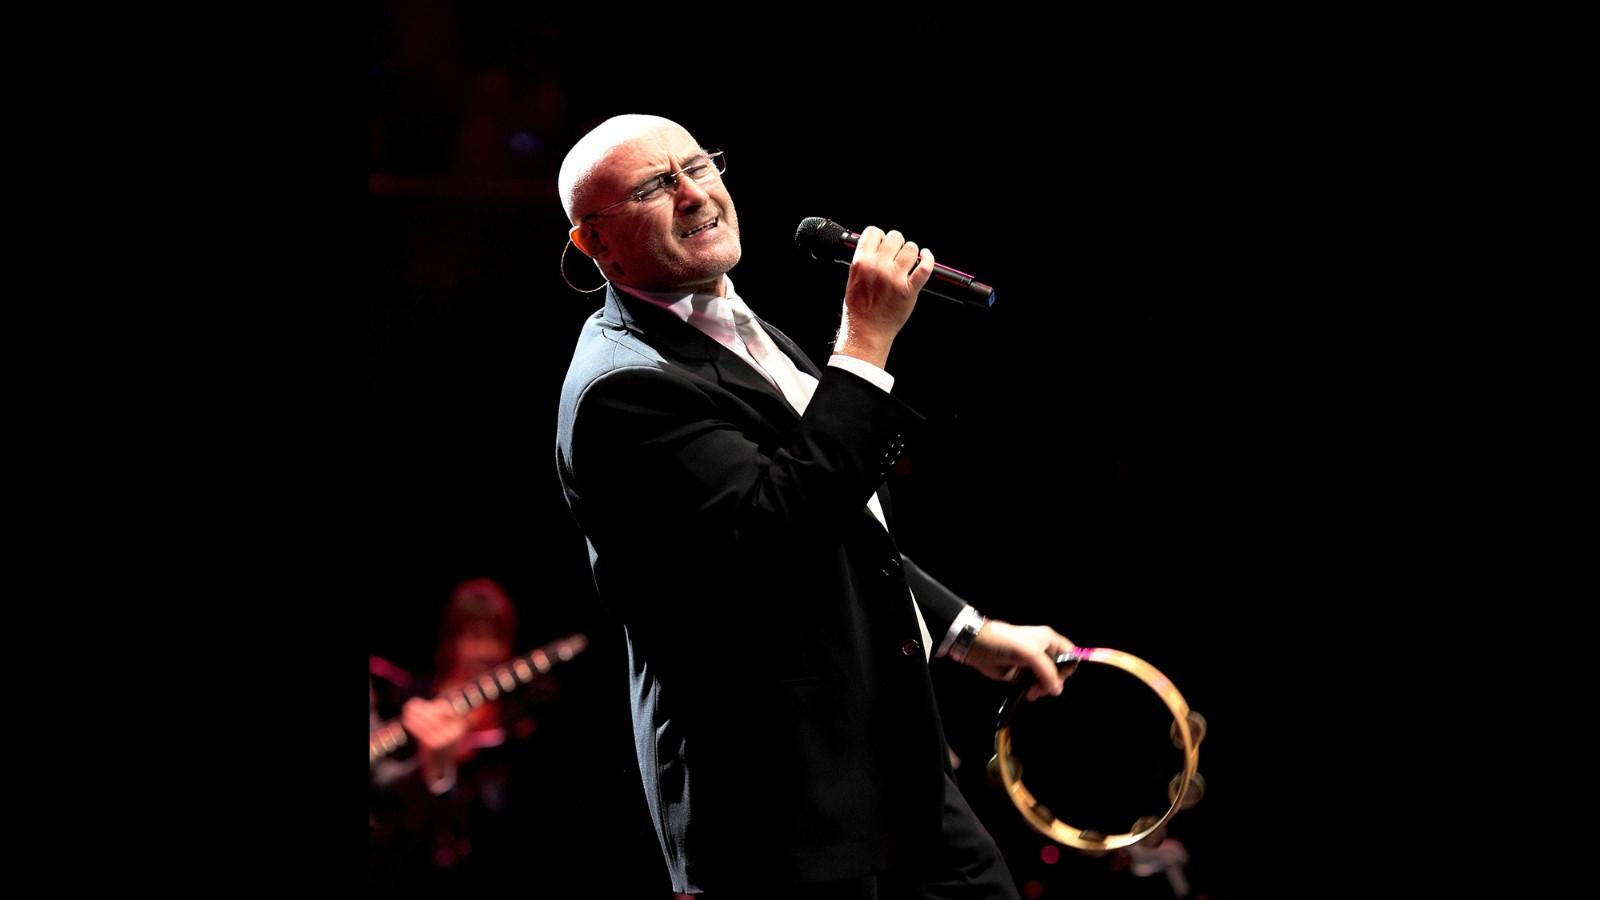 Phil Collins hospitalized after fall